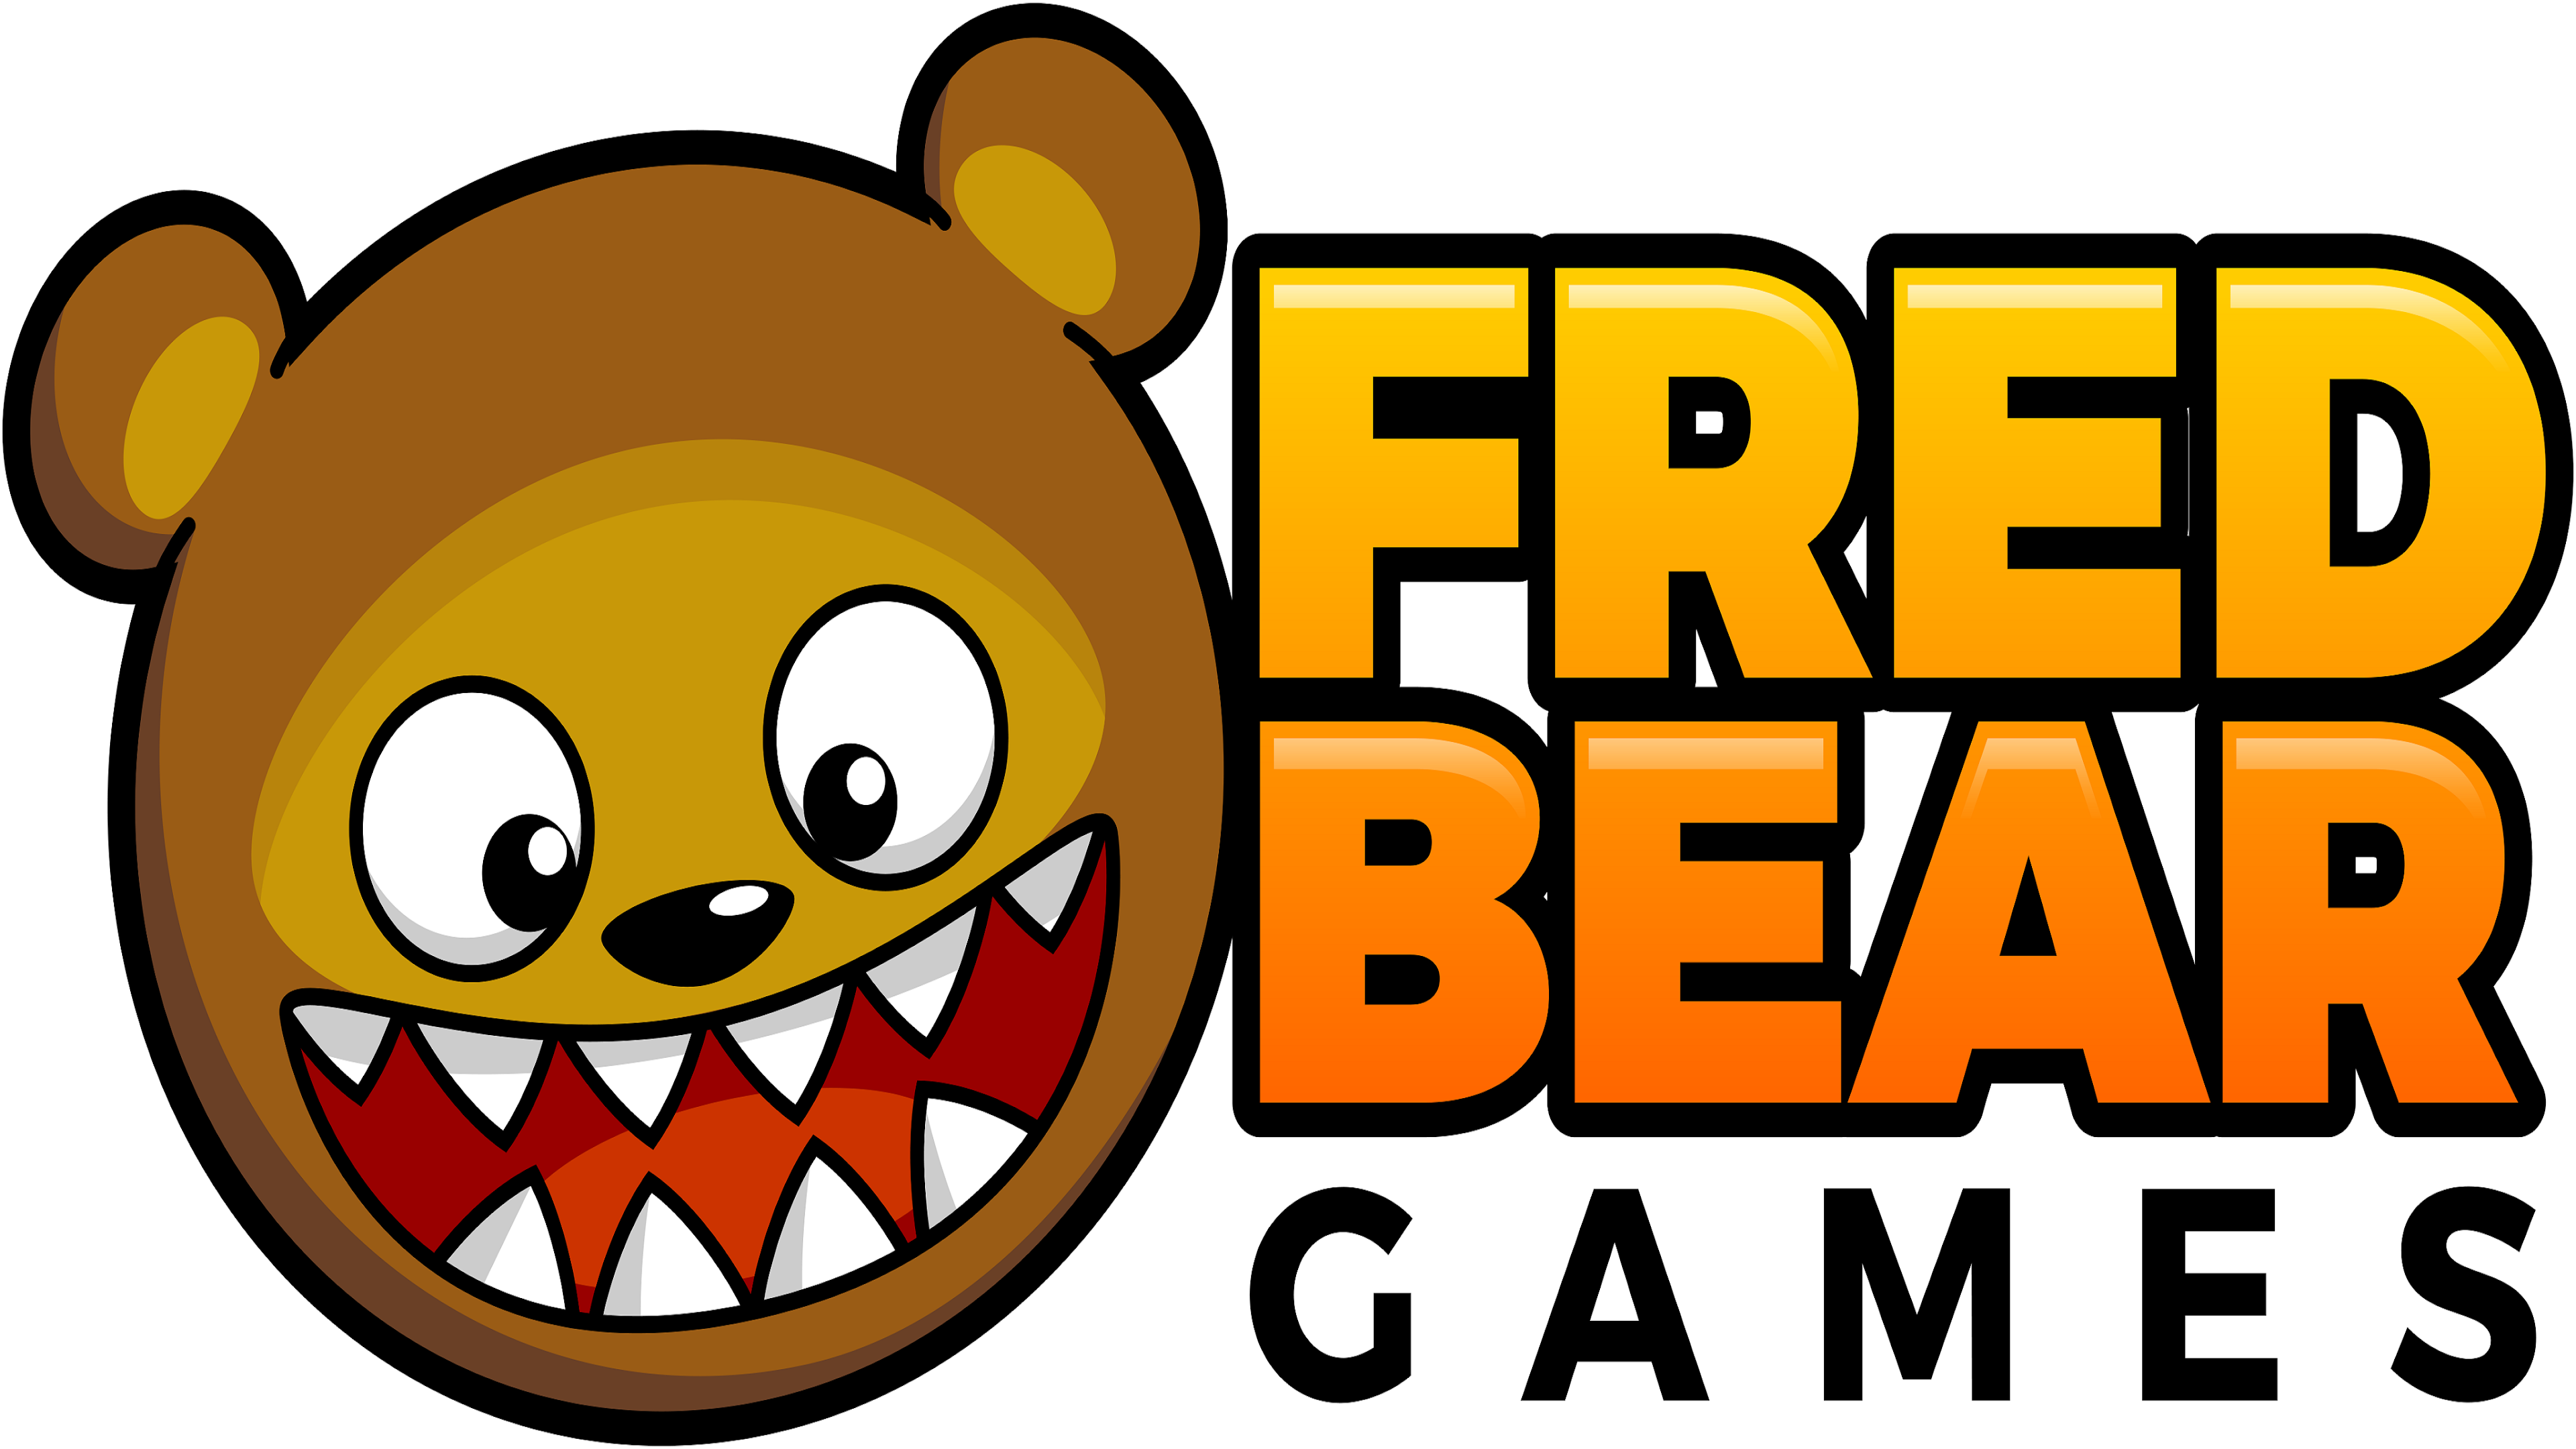 Android Apps by FredBear Games Ltd on Google Play